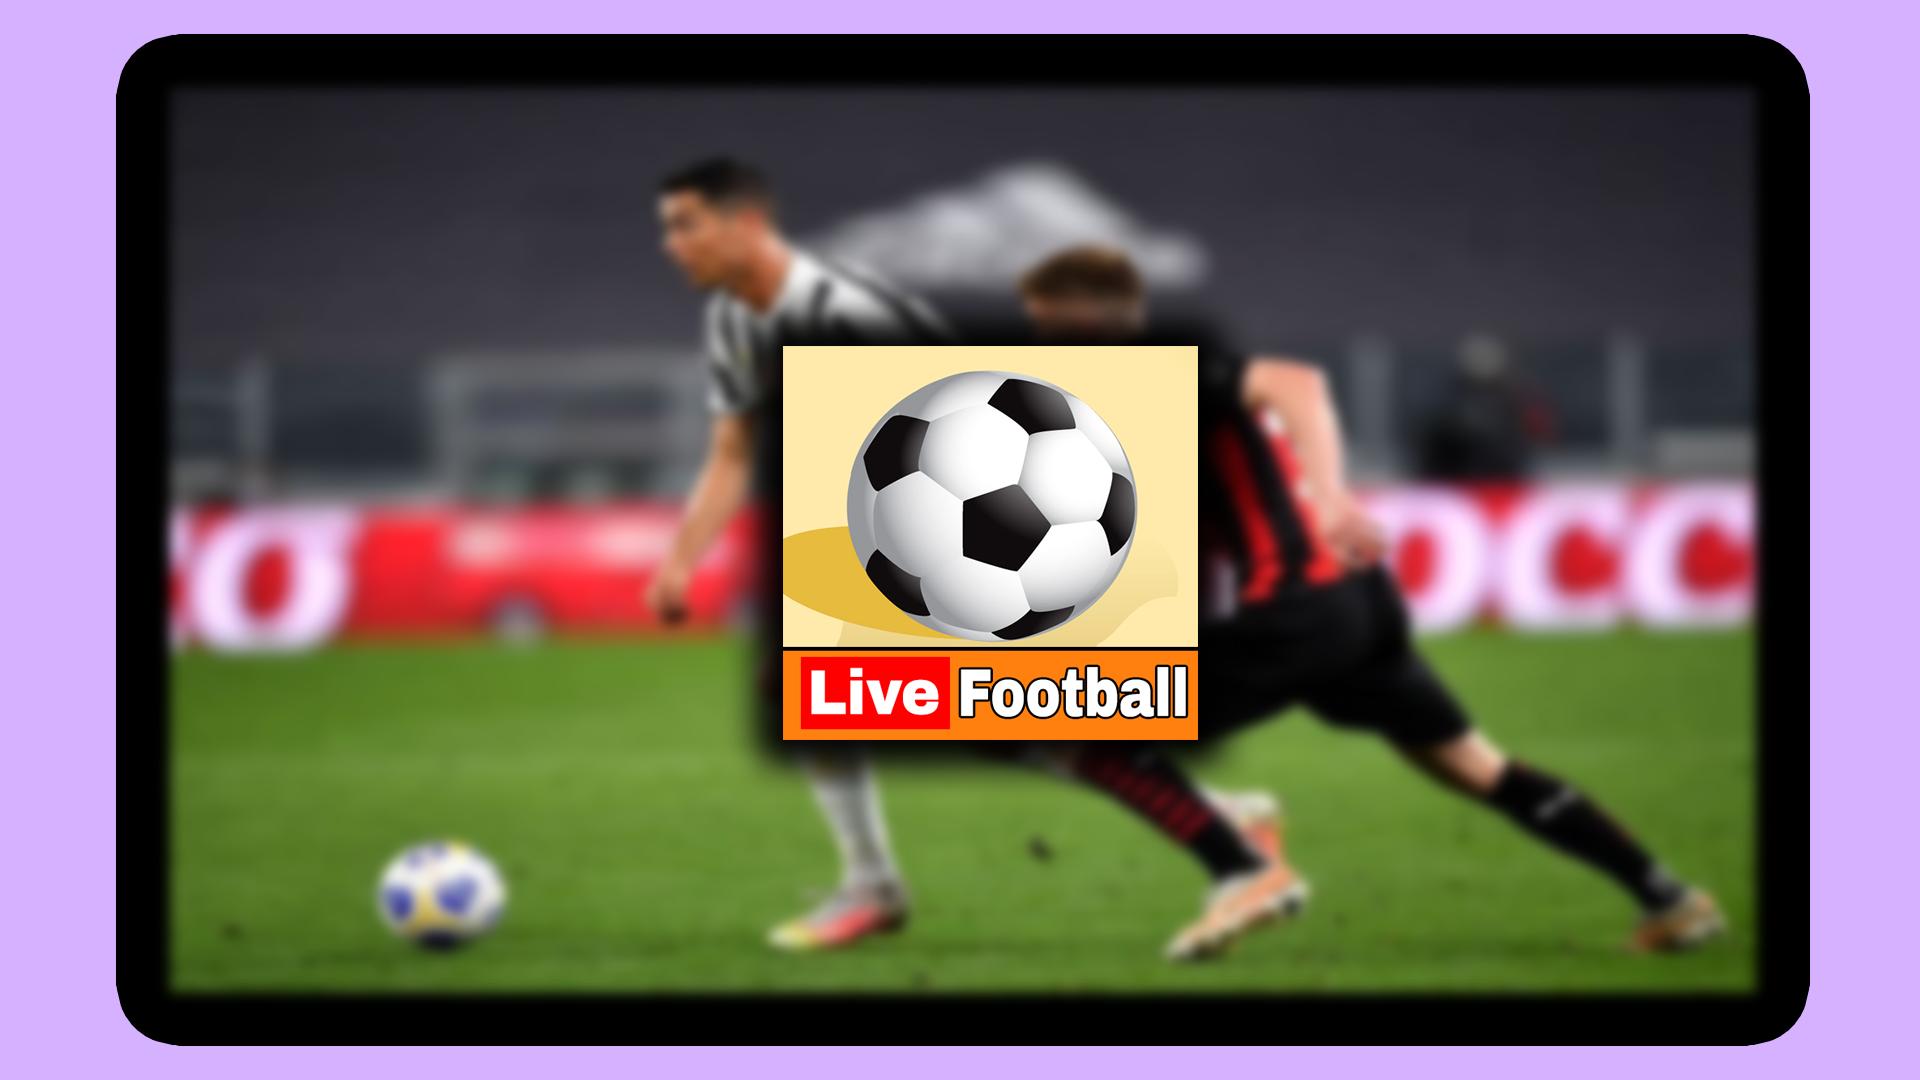 Live Football Score TV for Android - APK Download